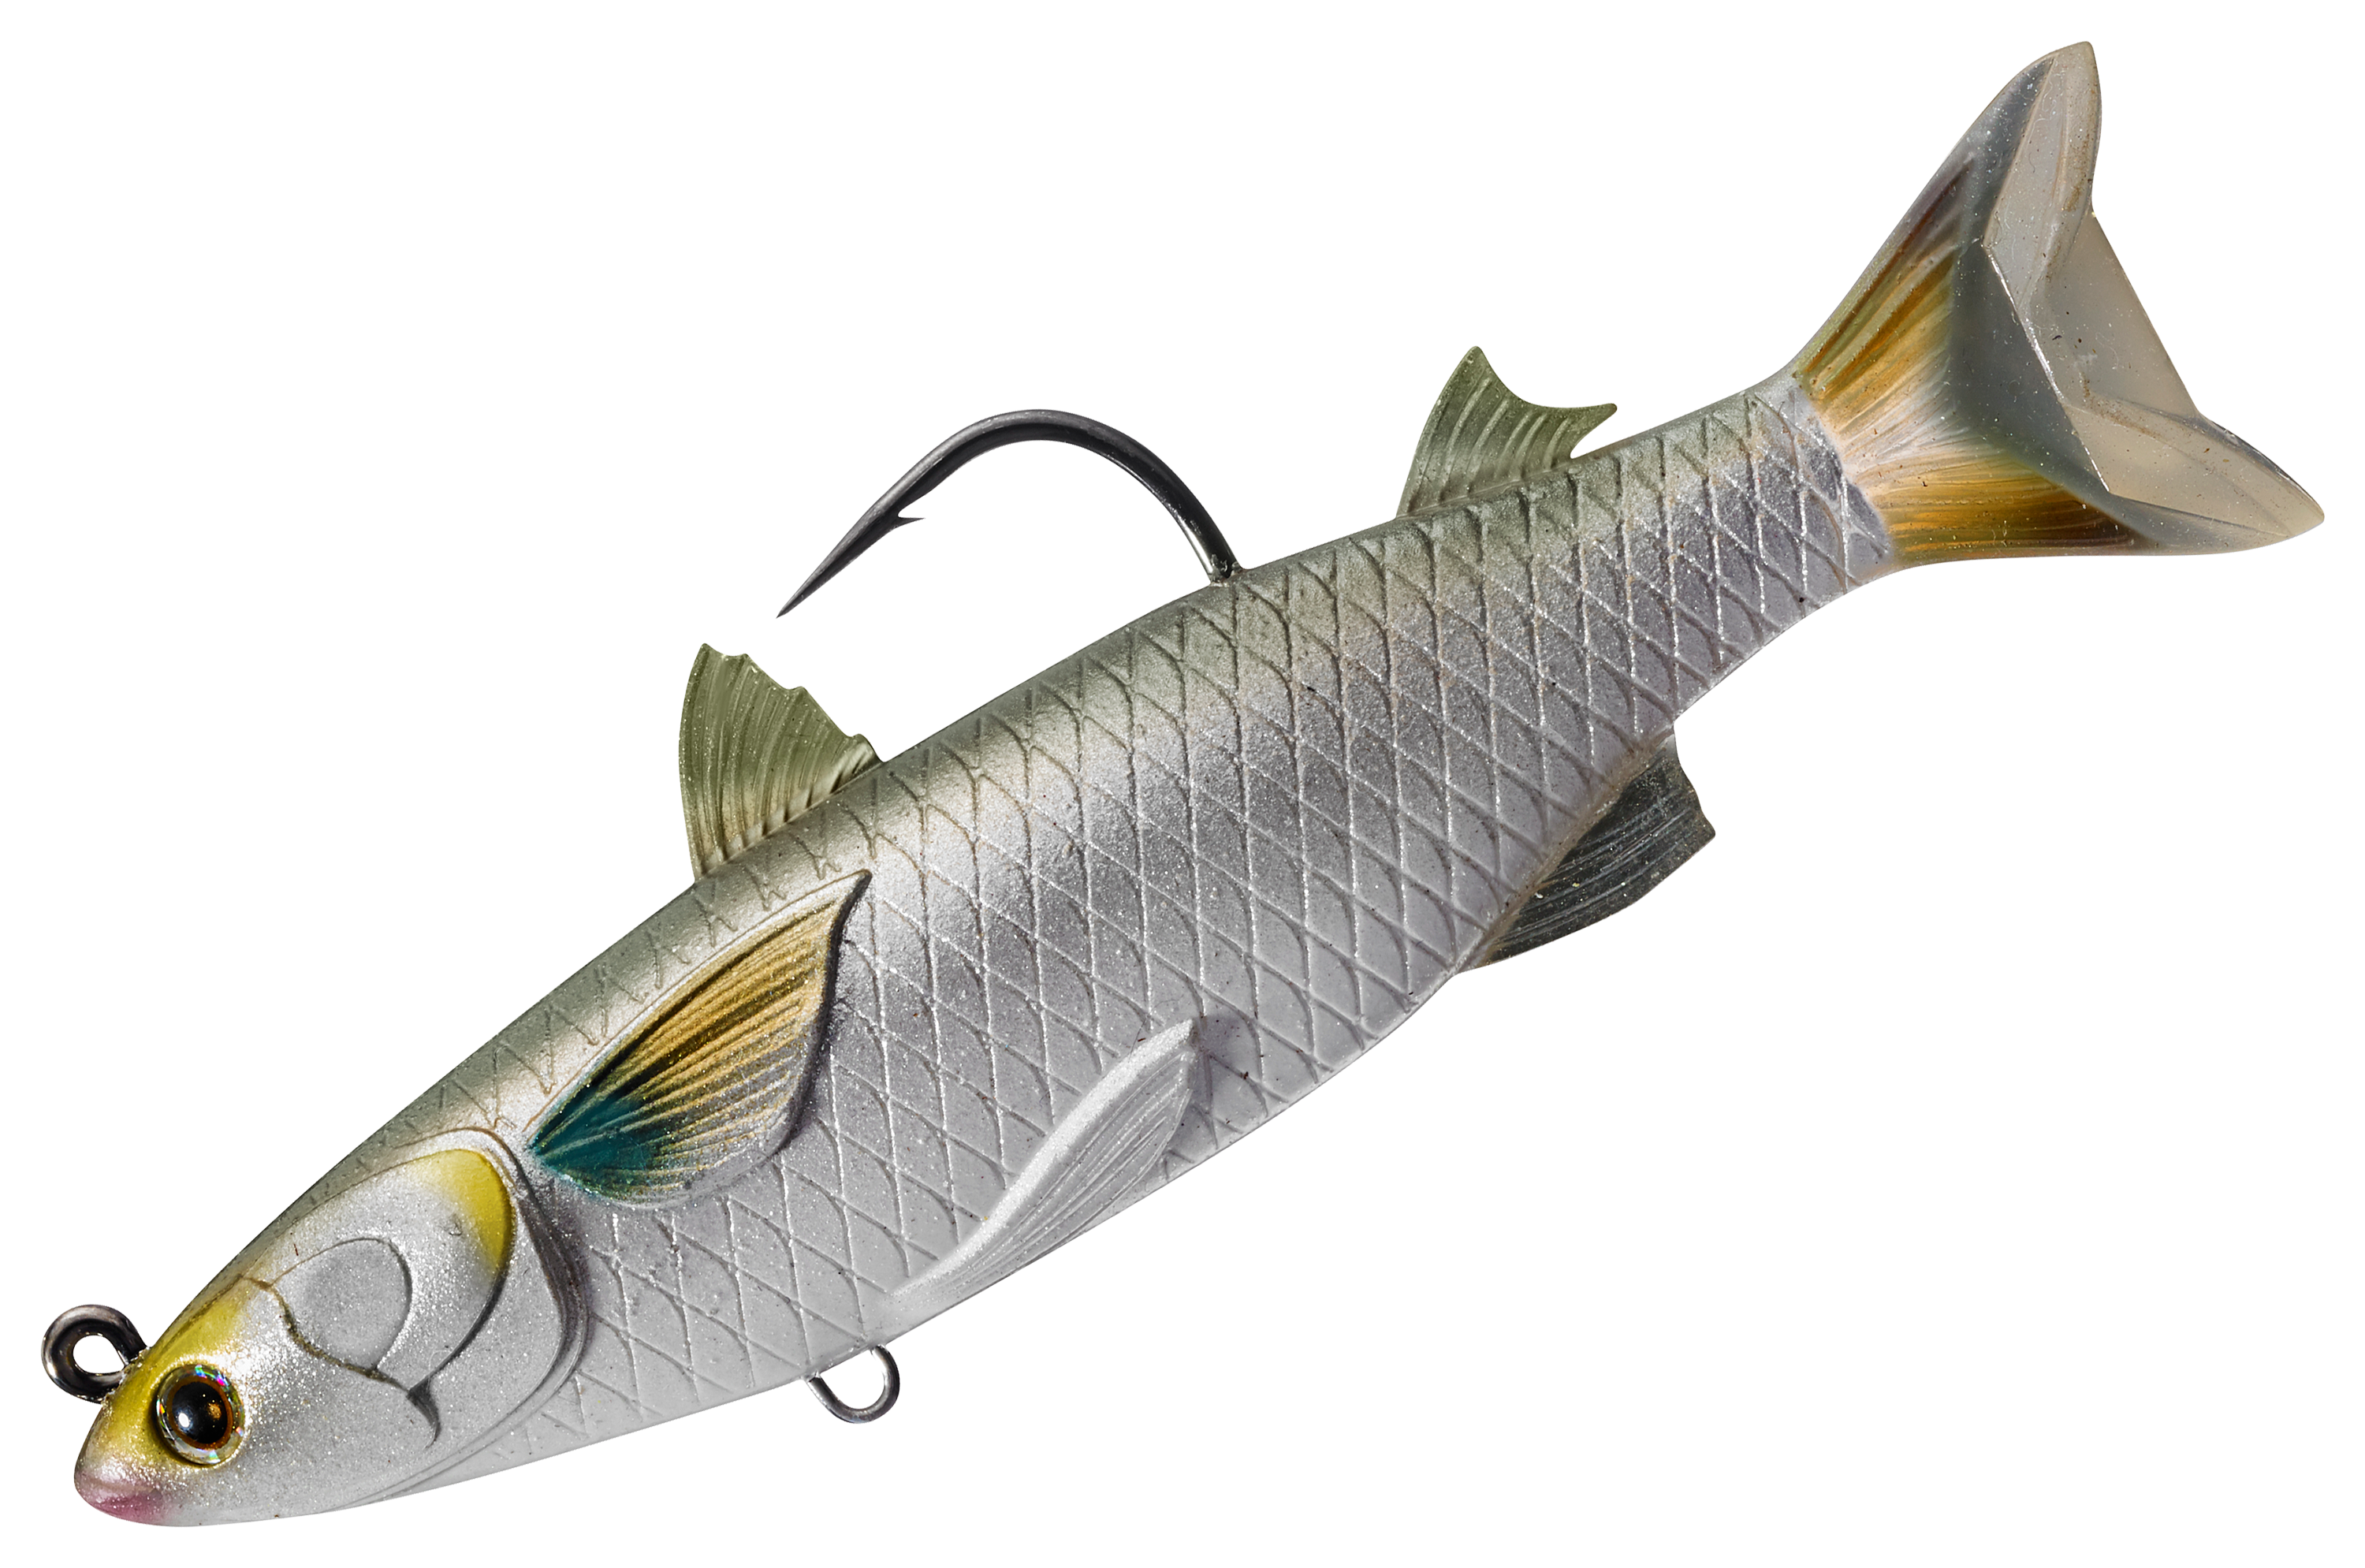 Live Target Trout (Adult) Swimbait 7.5 inch - (TRS190MS)